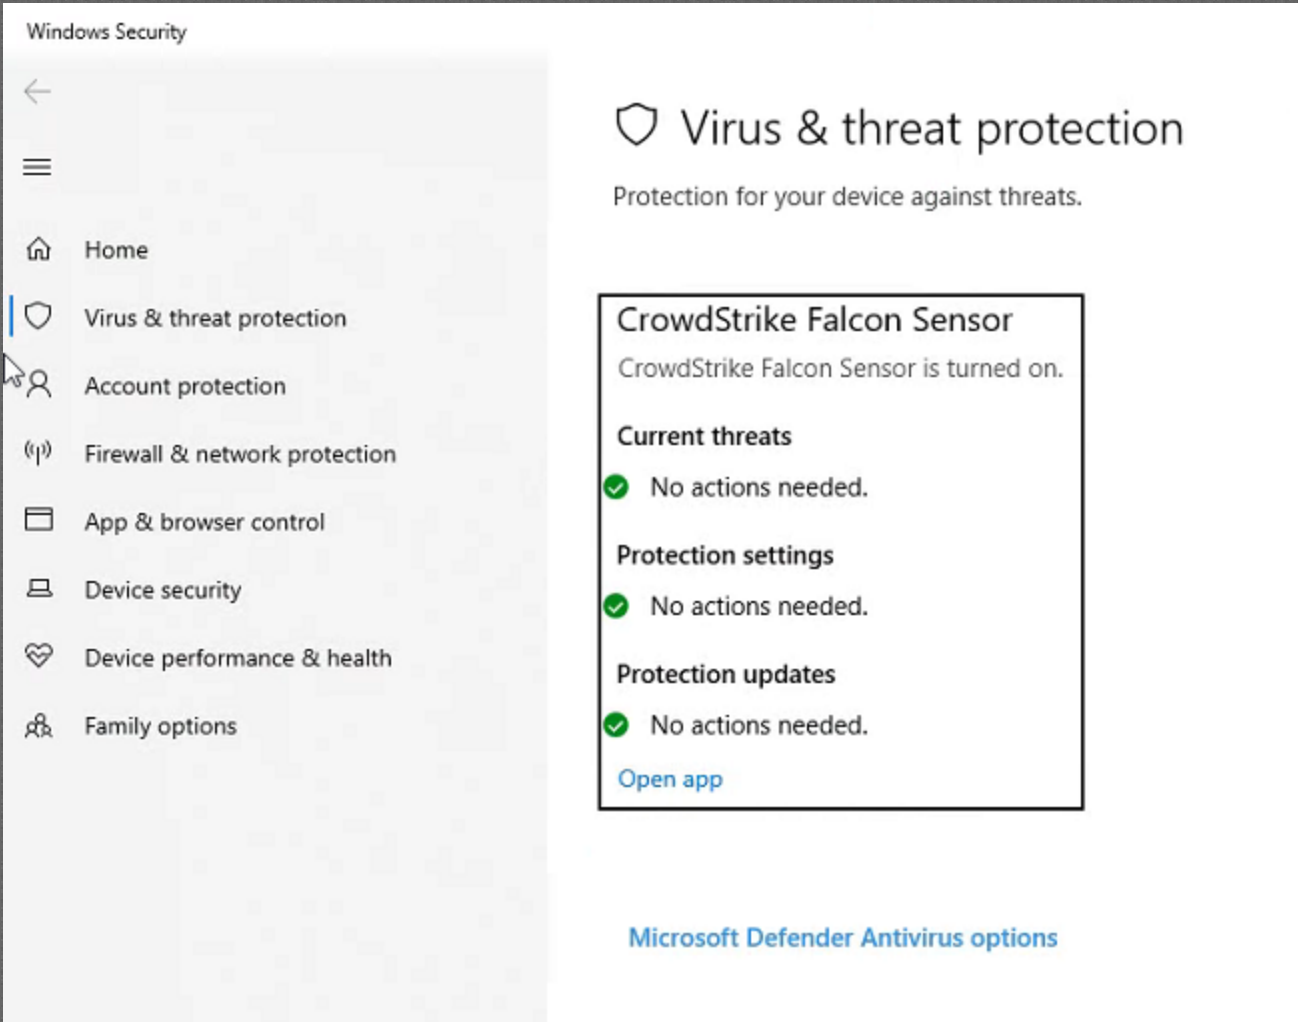 In Virus and thread protection choice on left side, image shows CrowdStrike Falcon Sensor. Green checks for Current threats, Protection settings, Protection updates.